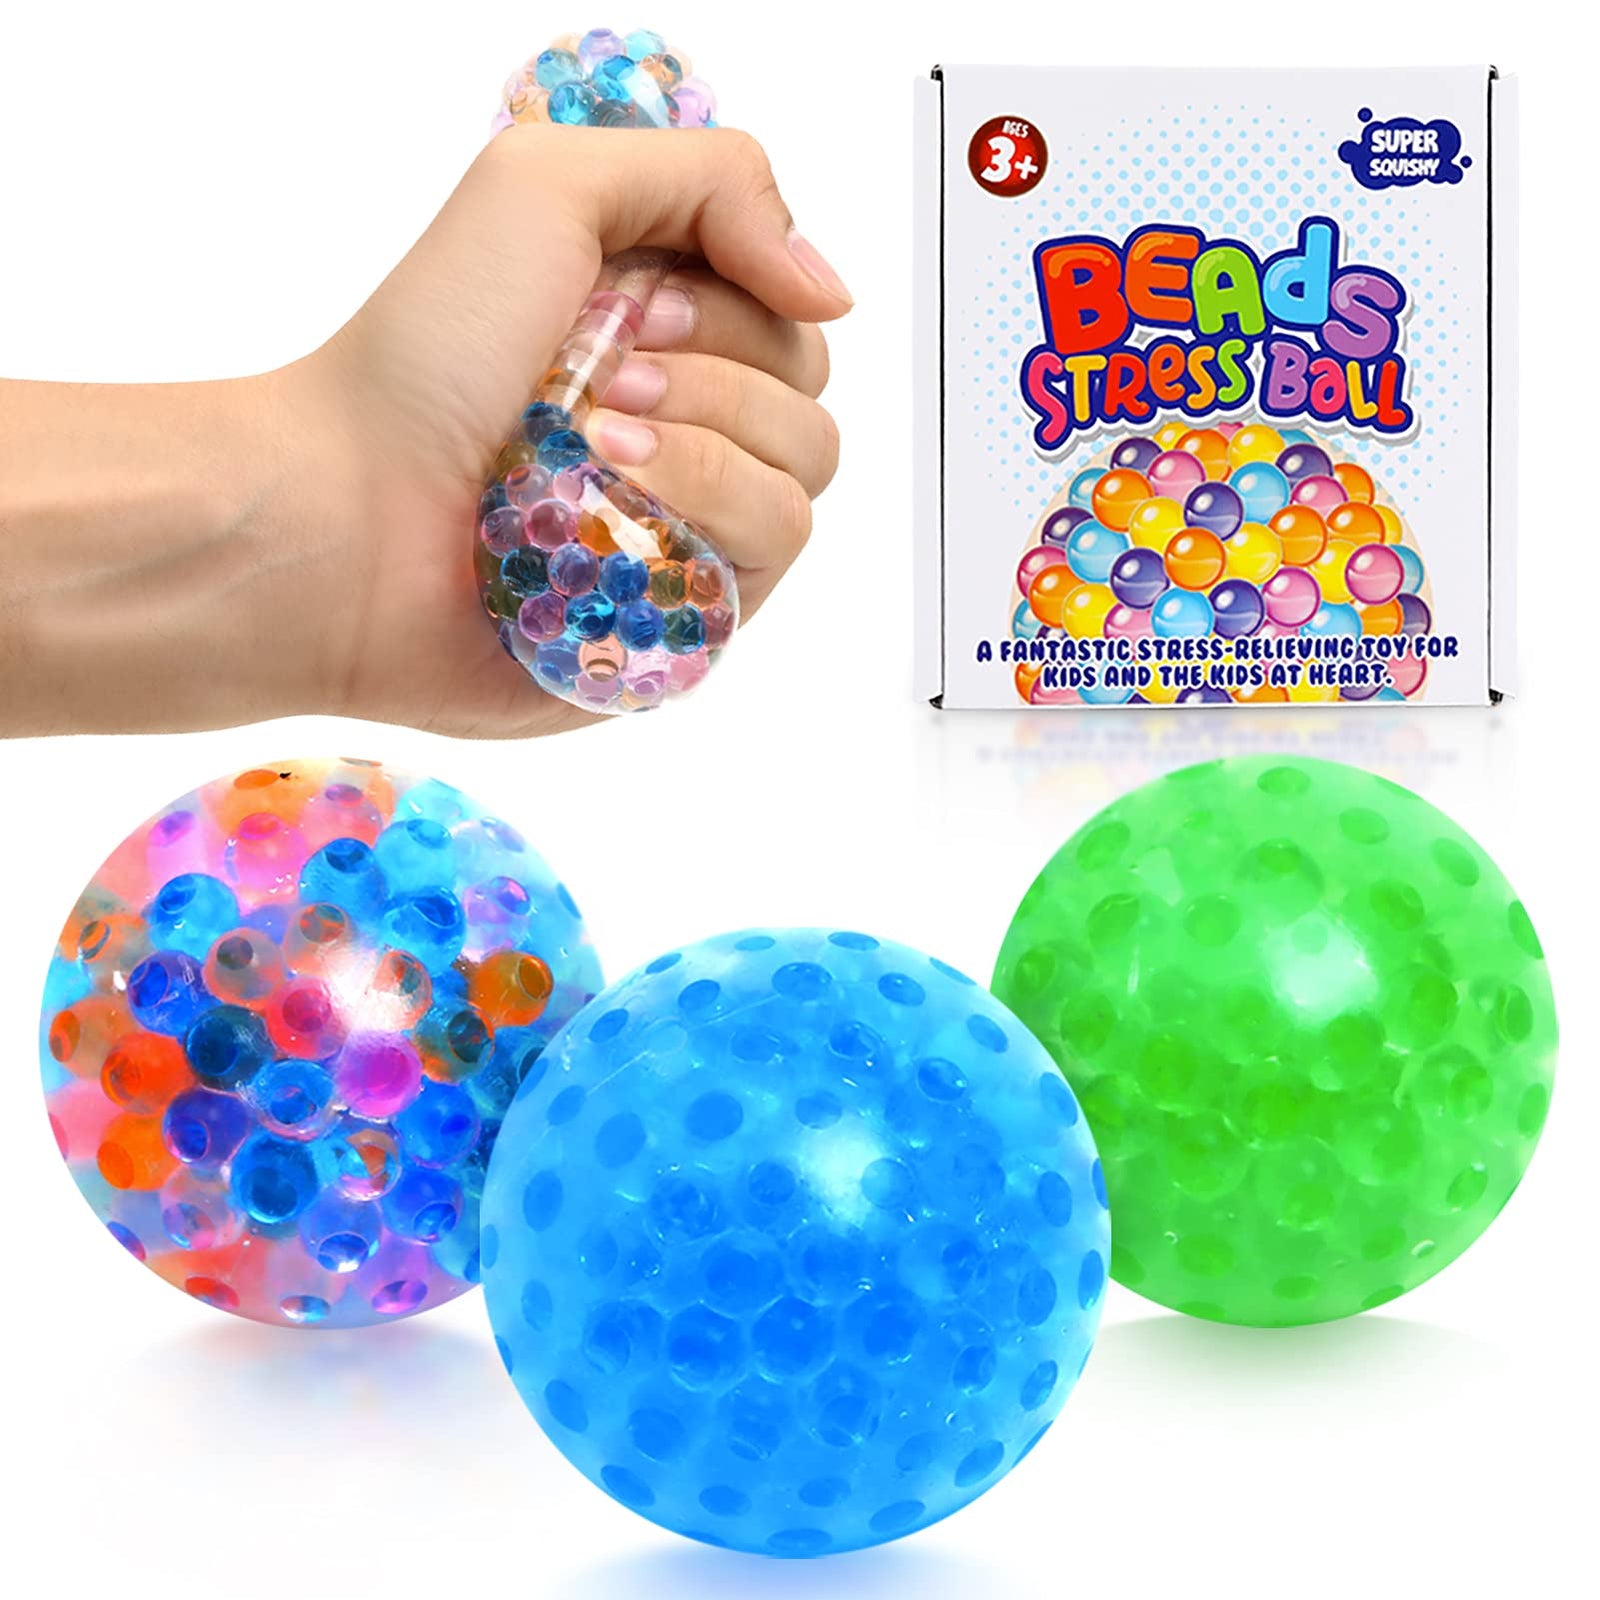 Lemostaar 3 Set Water Beads Stress Relief Squeezing Balls for Kids and Adults: Best Calming Tool to Relieve Anxiety, Vent Mood and Improve Focus, Soft Novelty Hand Grip Pressure Ball